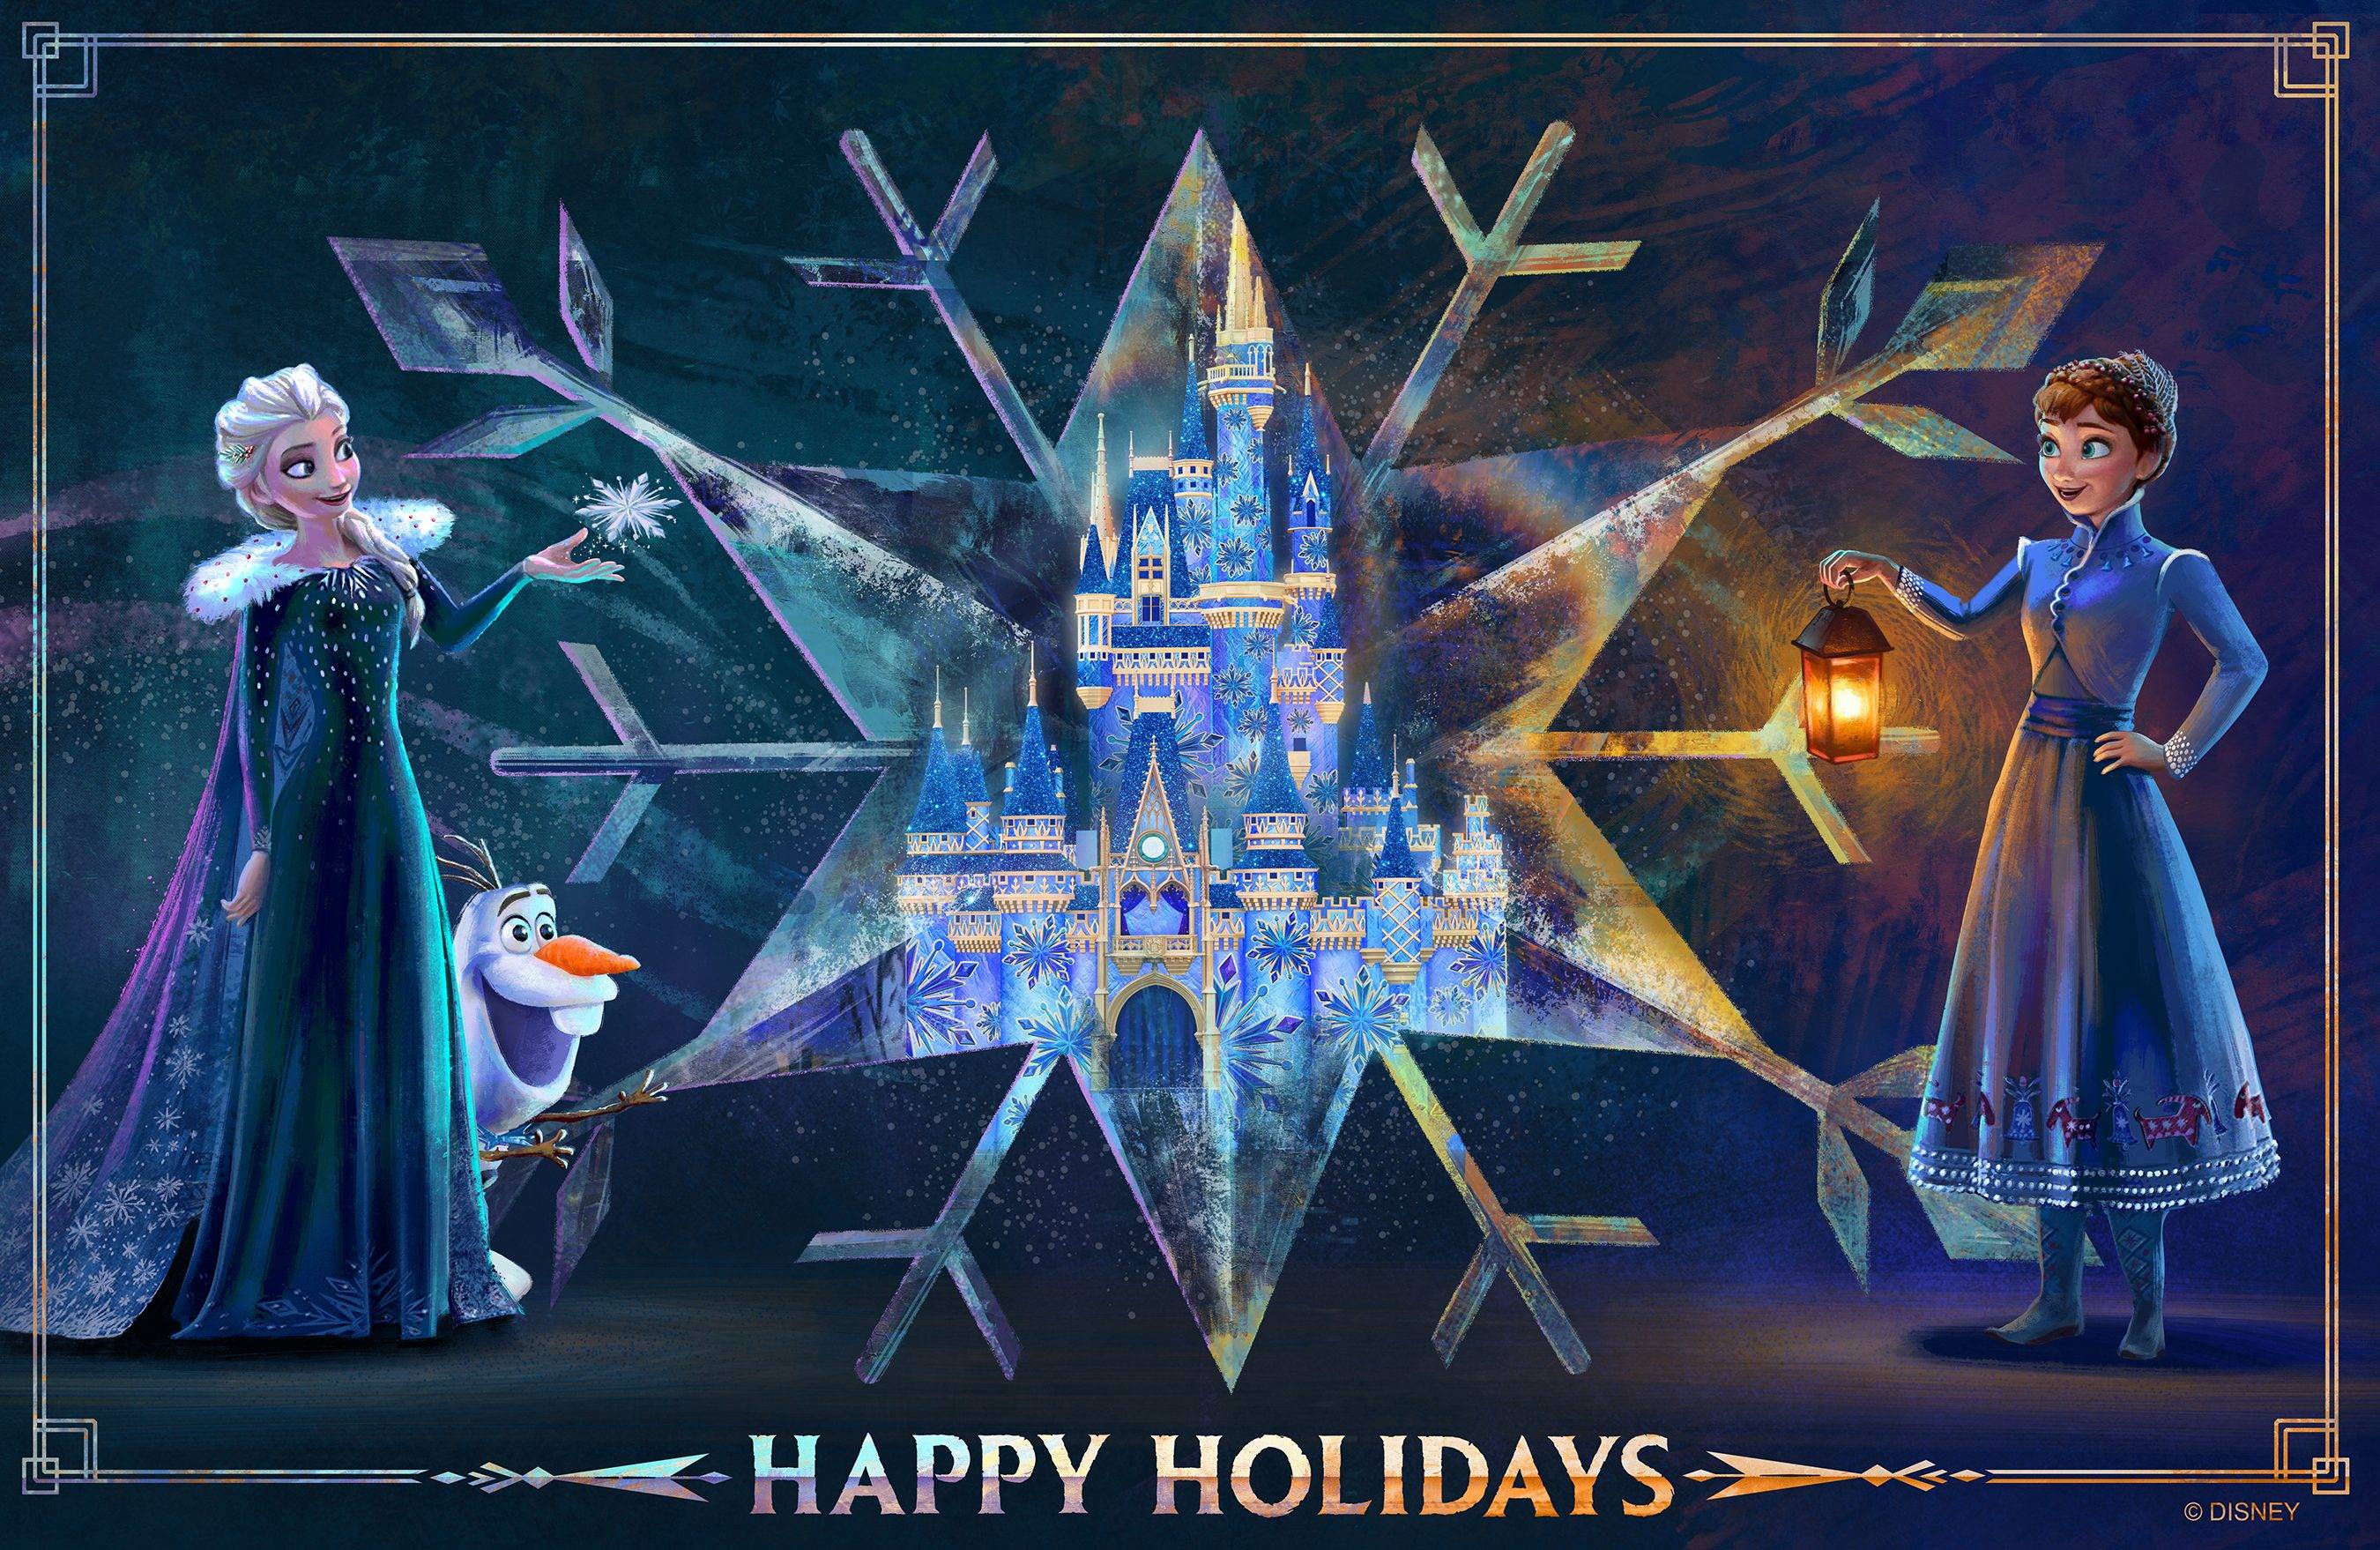 More details and showtimes for the new 'Frozen Holiday Surprise' at Magic Kingdom